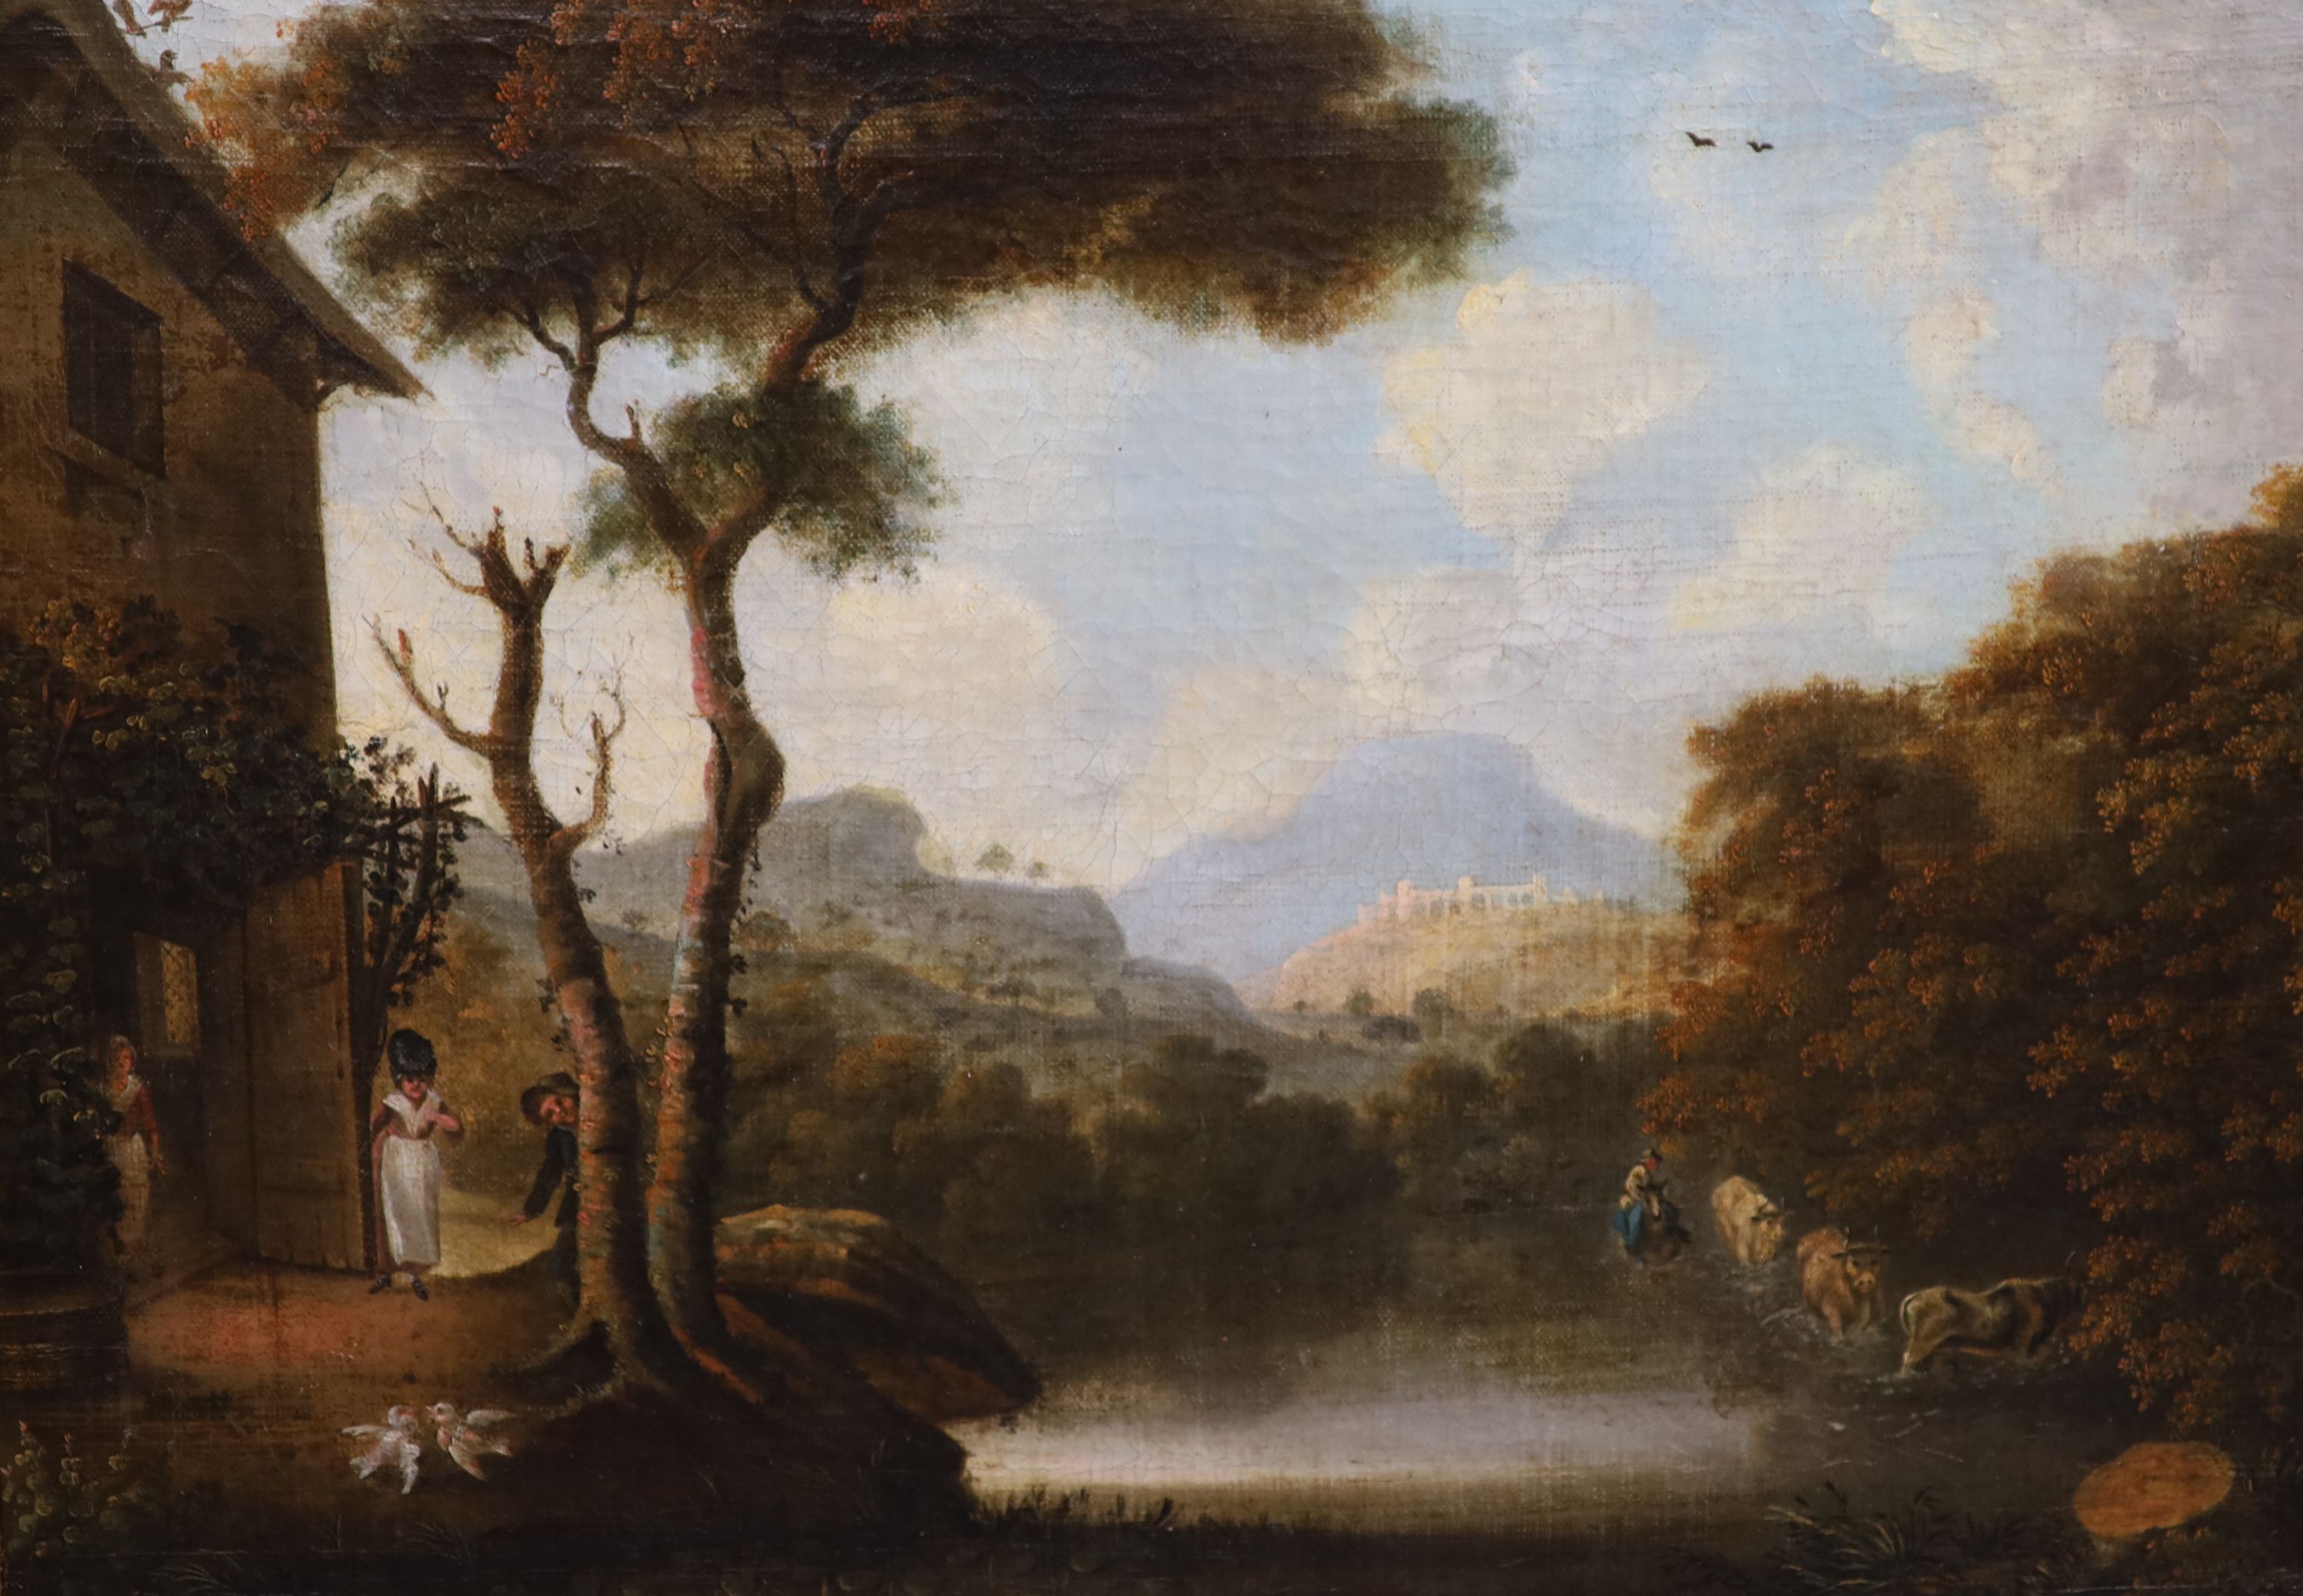 English School (18th century), oil on canvas, Classical river landscape and companion piece, a pair